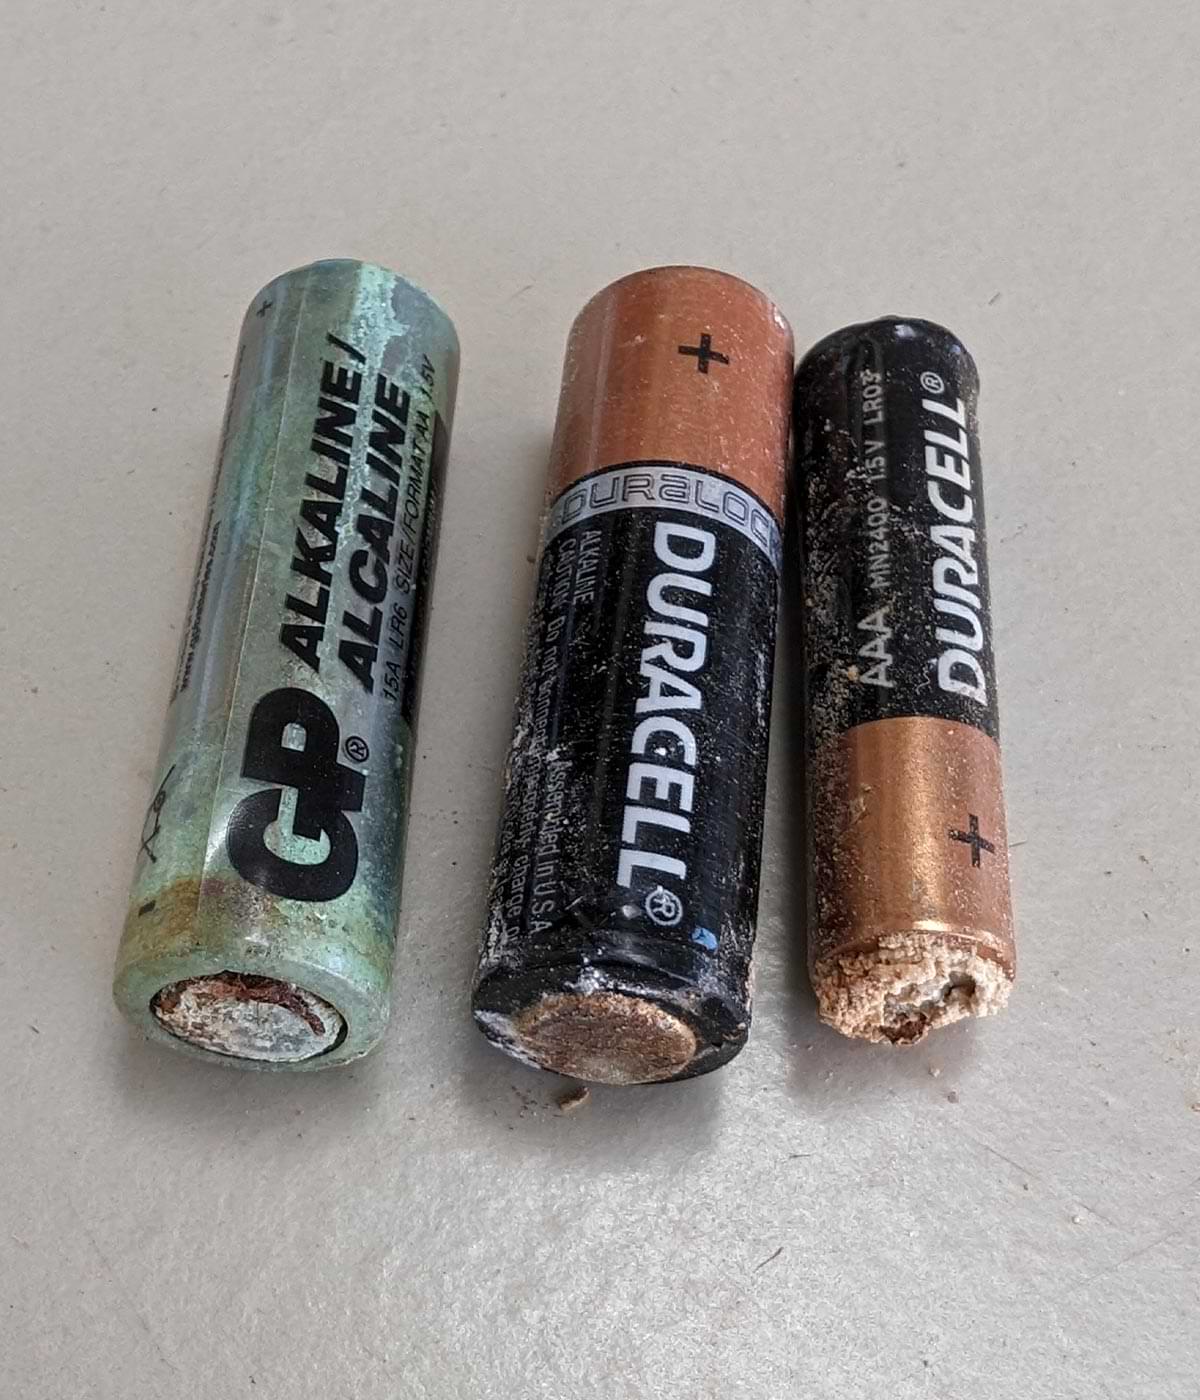 a GP and two Duracell alkaline batteries, all three in various stages of corrosion